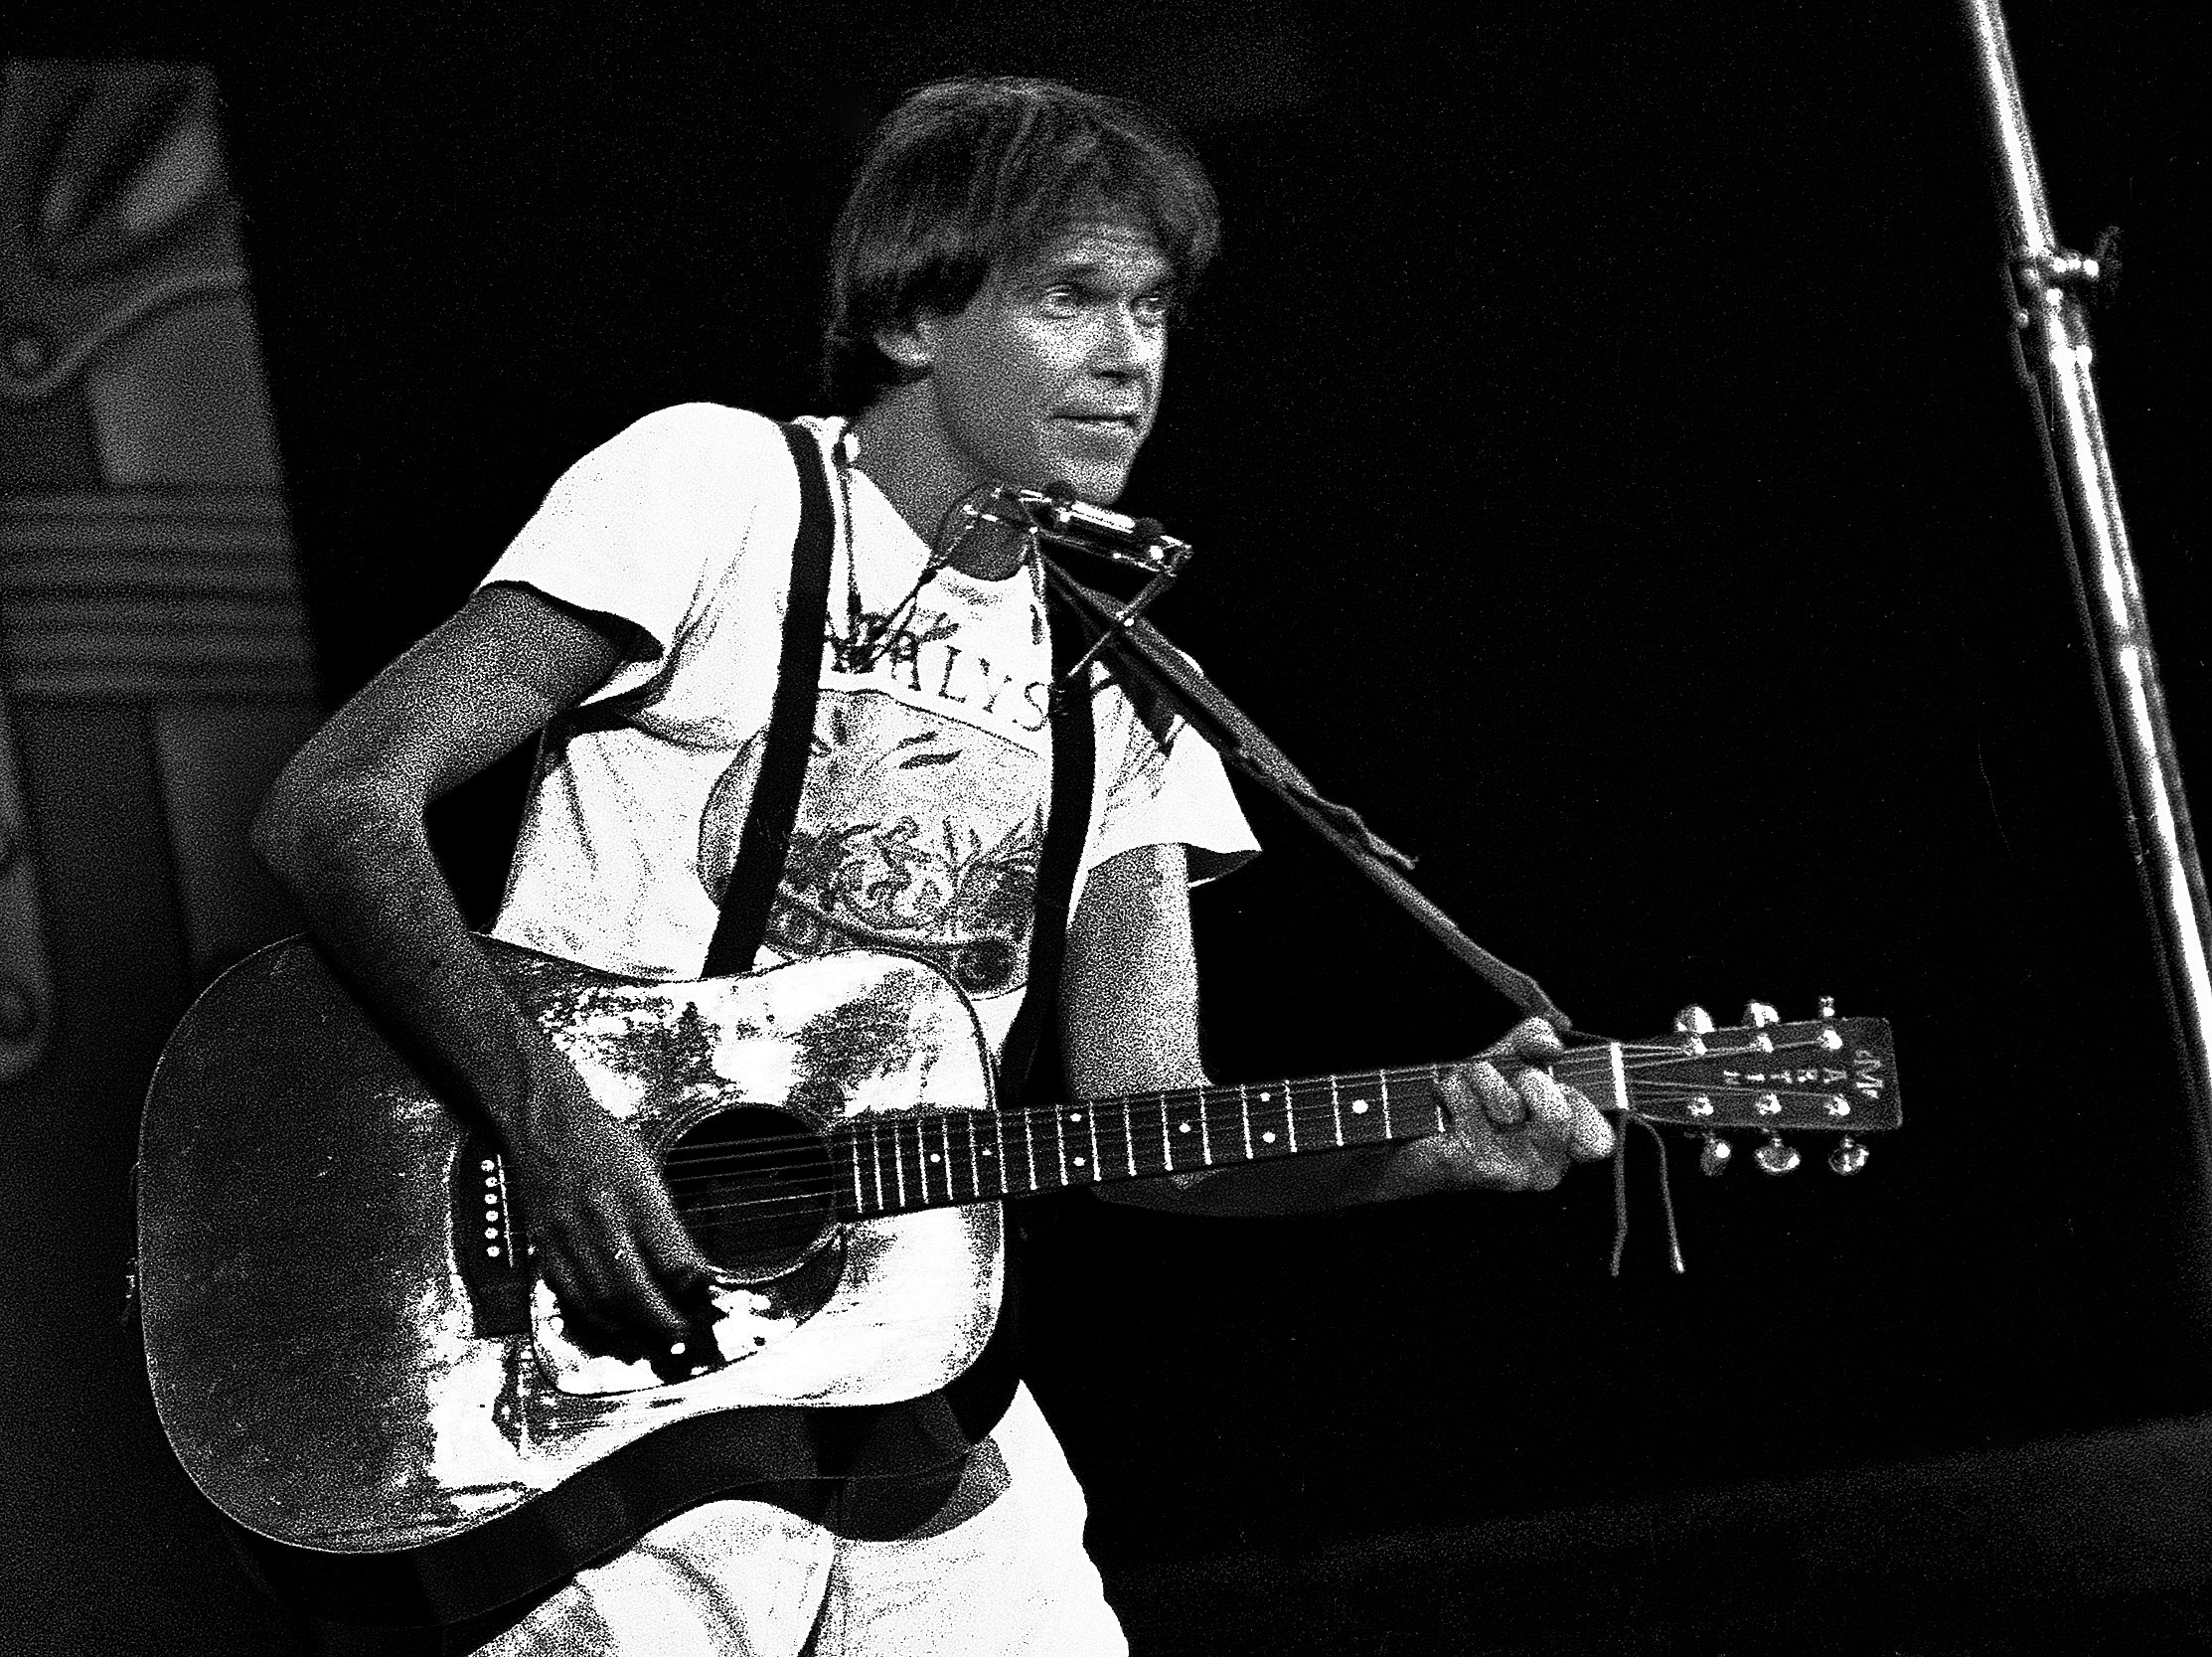 Neil Young holding a guitar